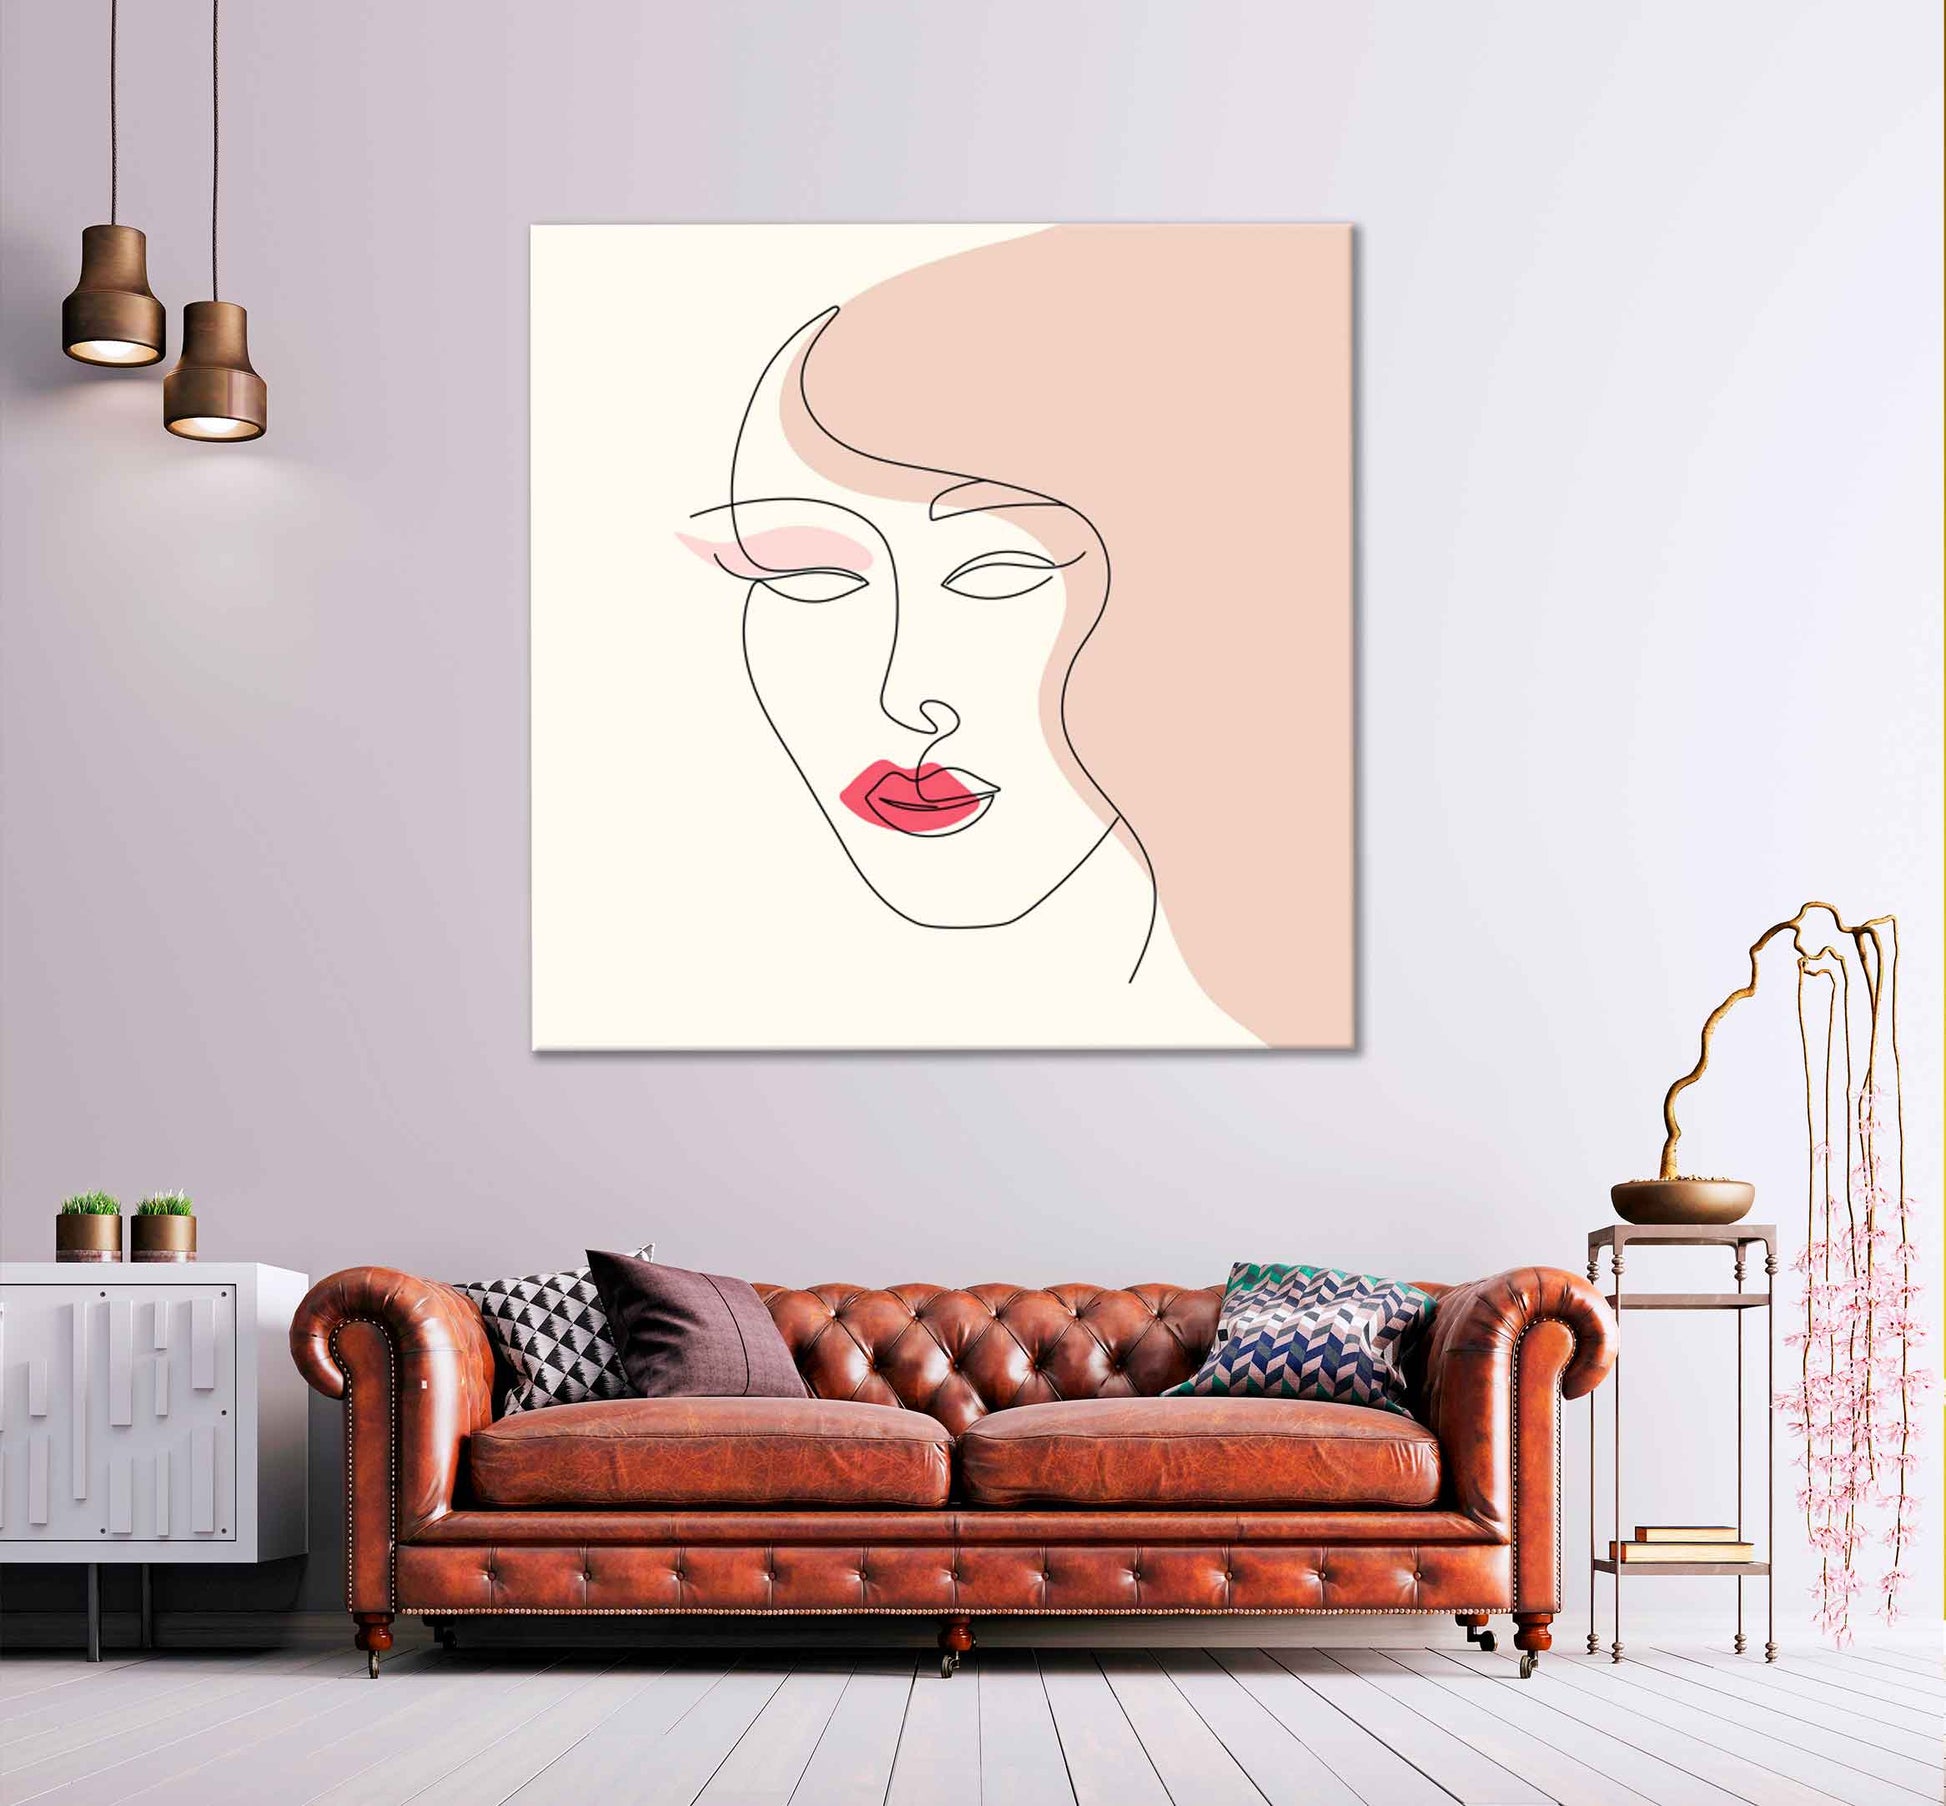 Square Canvas Red Lips & Girl Face Line Art Design High Quality Print 100% Australian Made